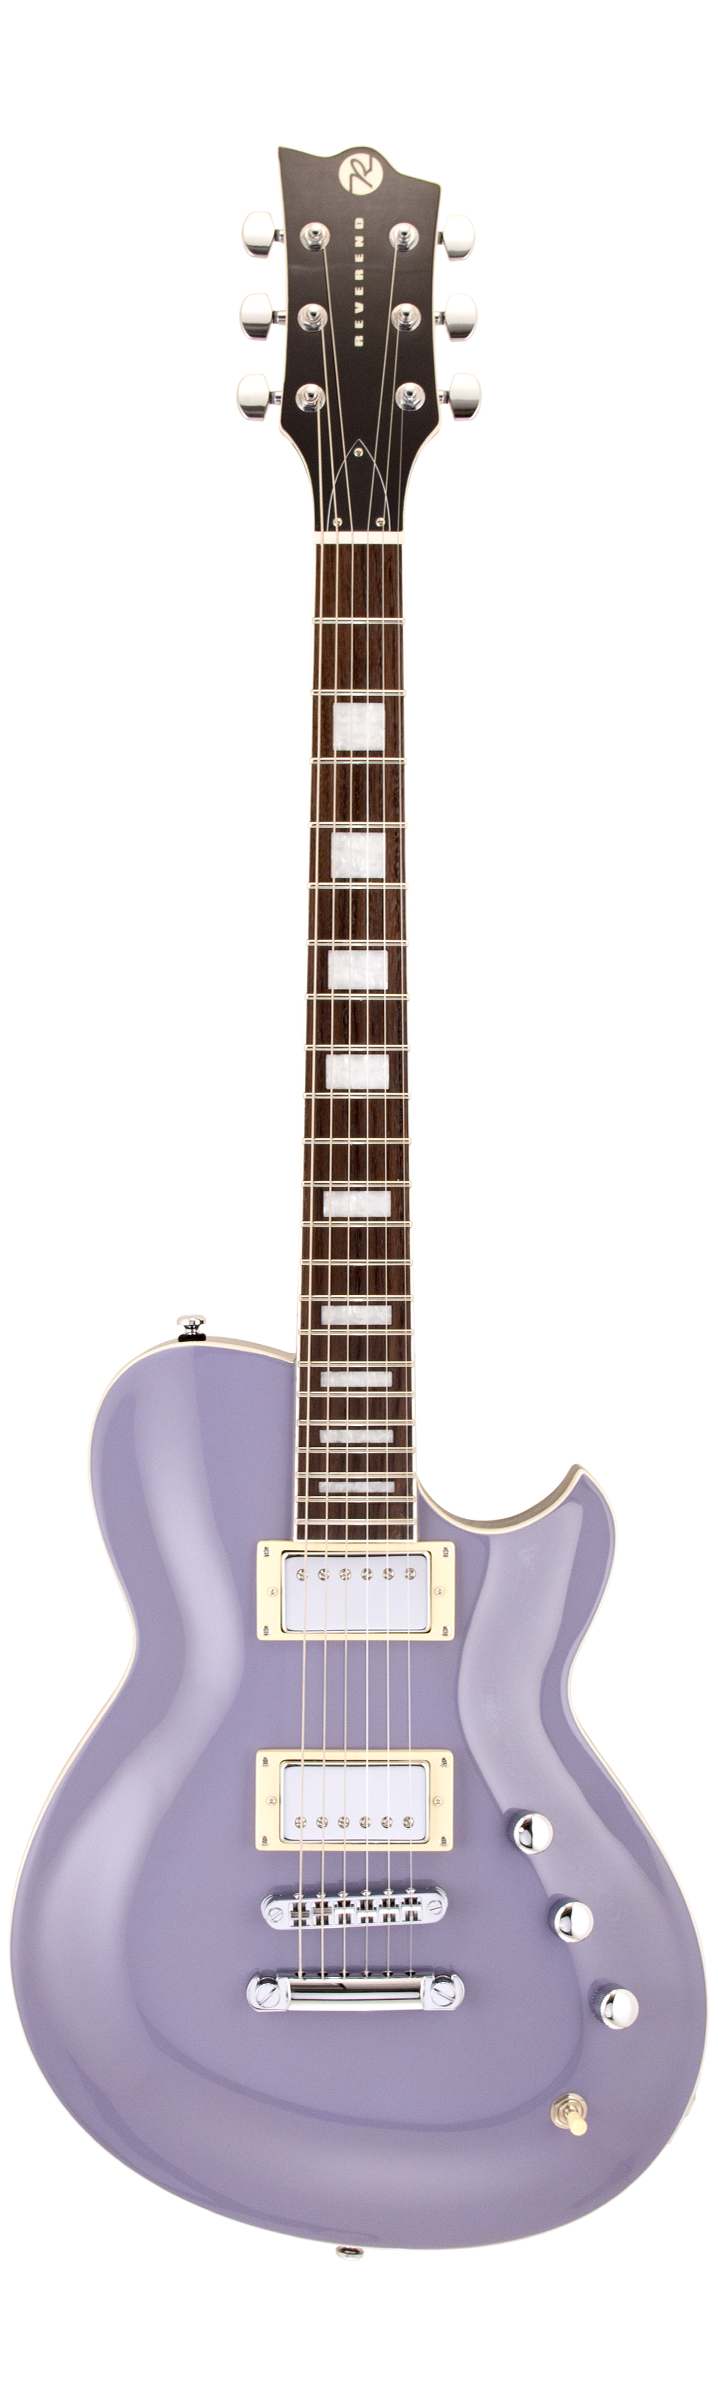 Full frontal of Reverend Roundhouse Periwinkle.